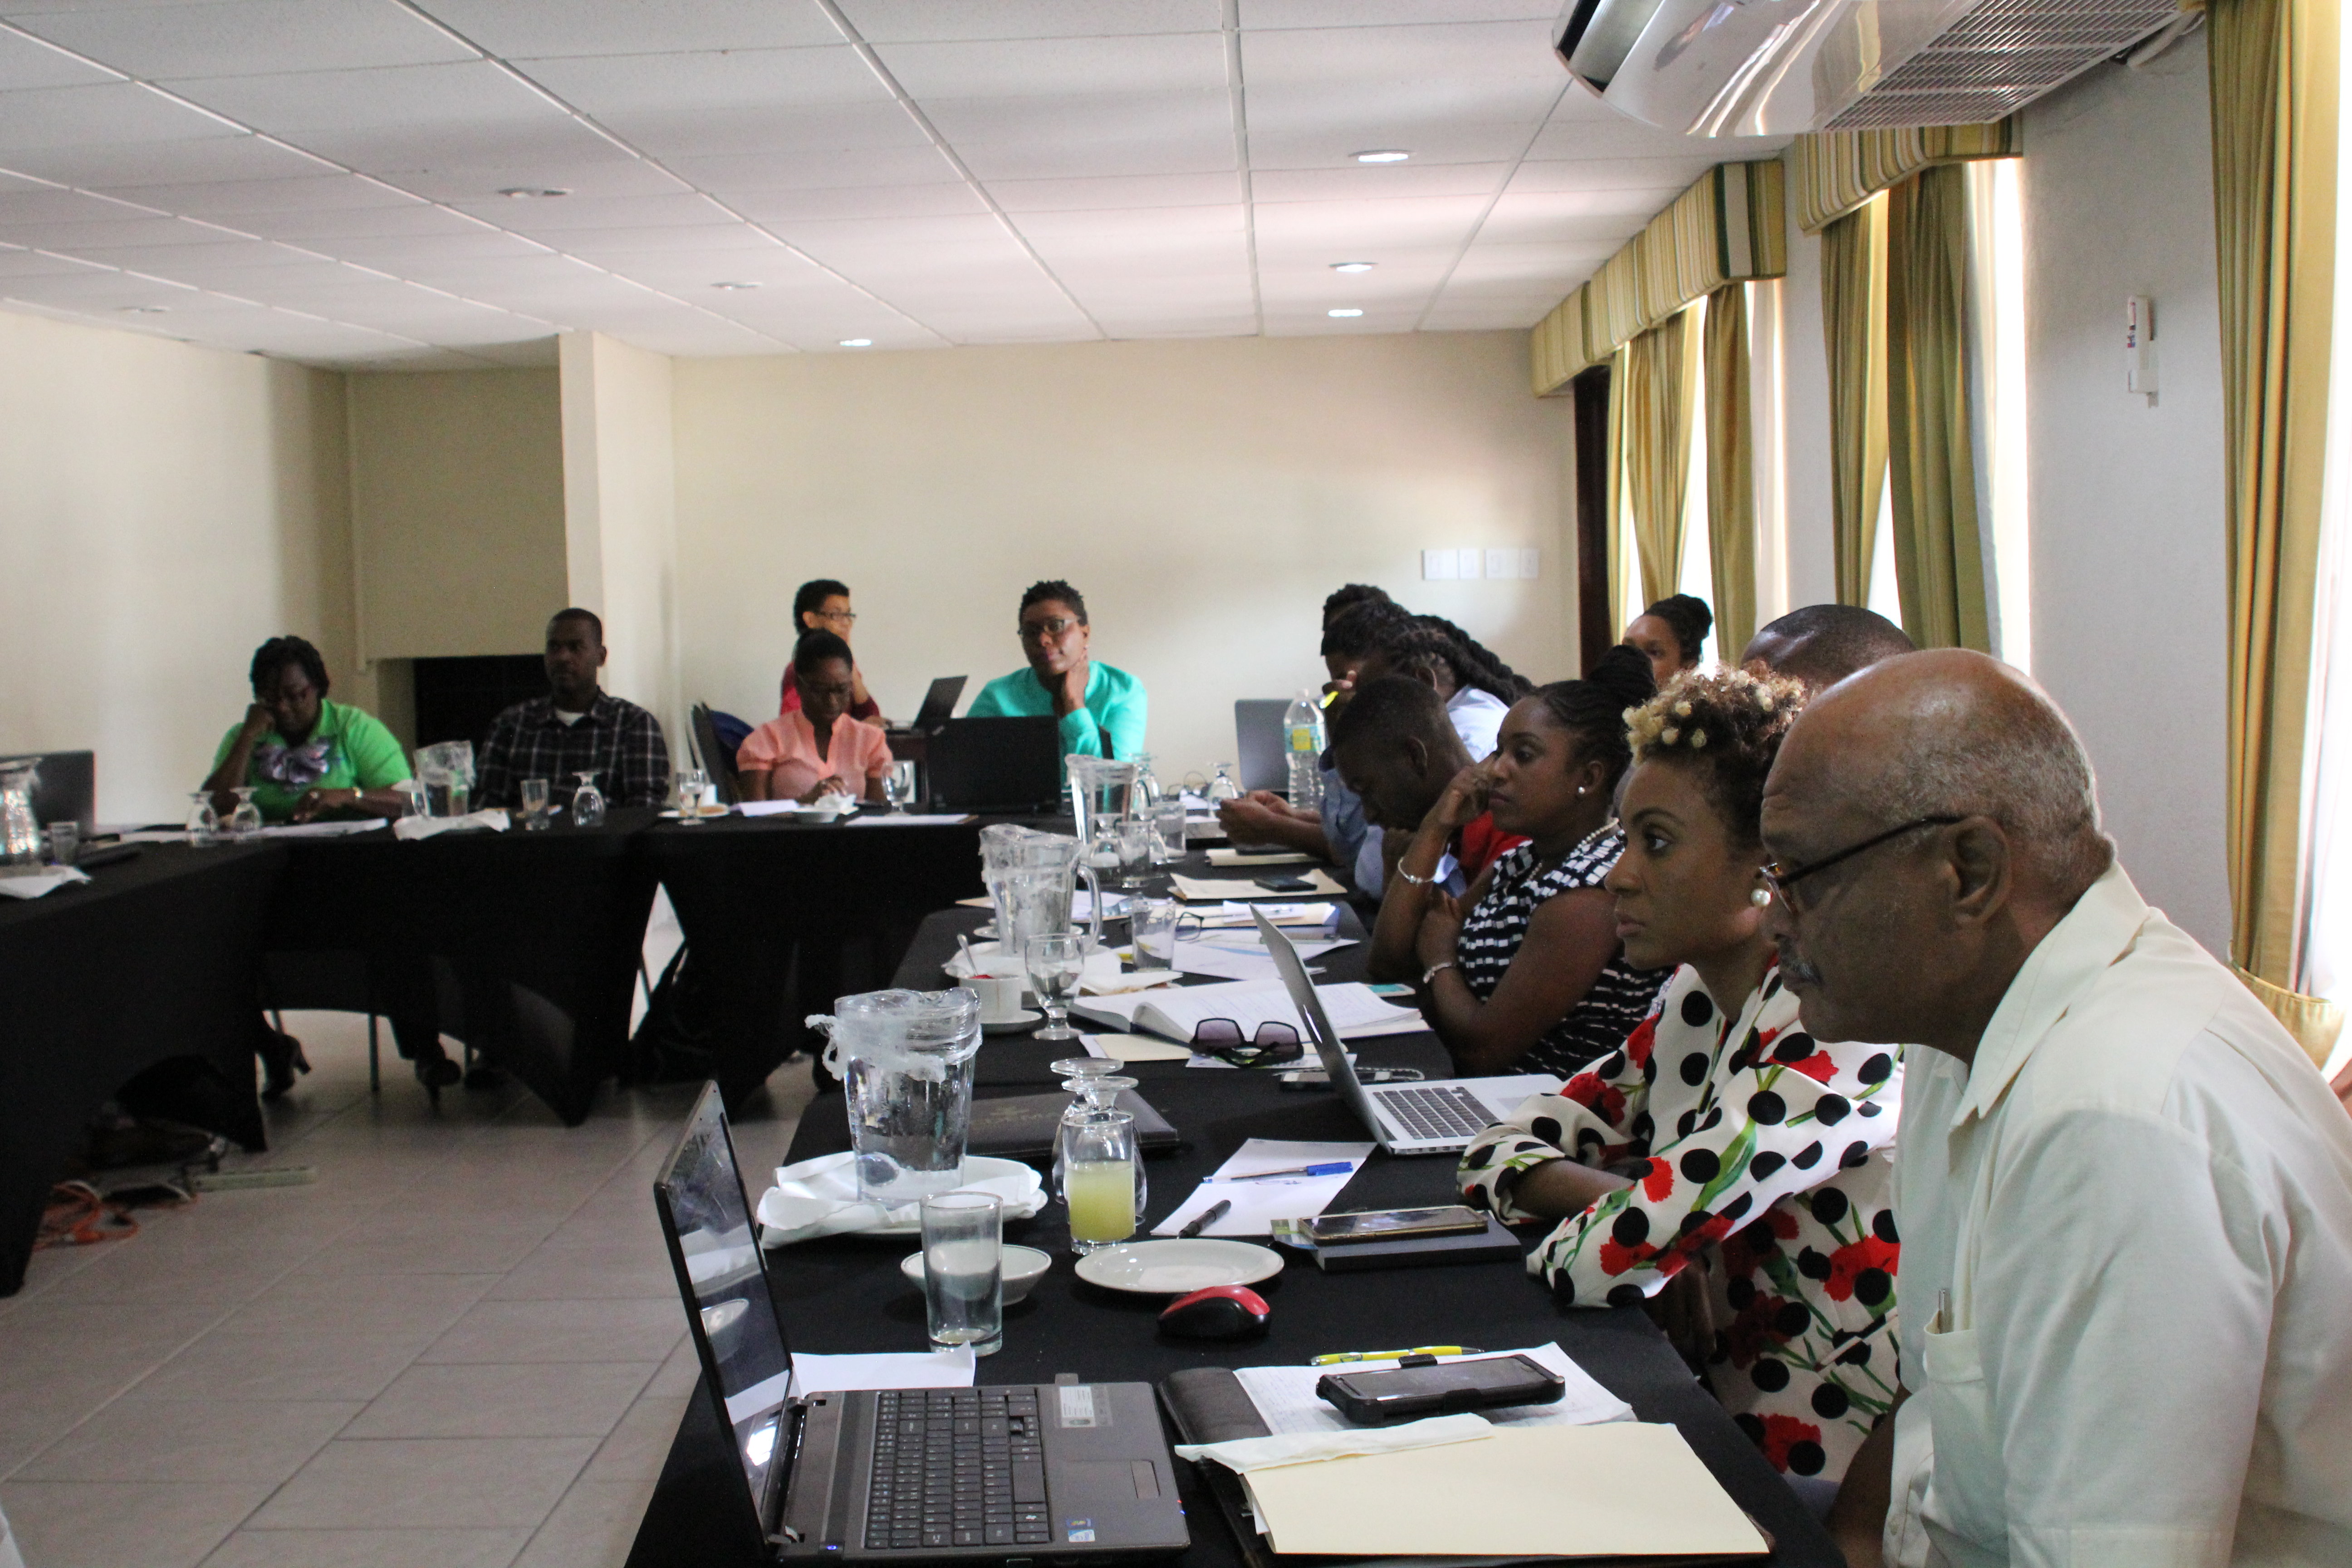 Regional stakeholders involved with numerous areas of resilience-building attended the pilot of the Community-based Disaster Resilience course in Barbados.